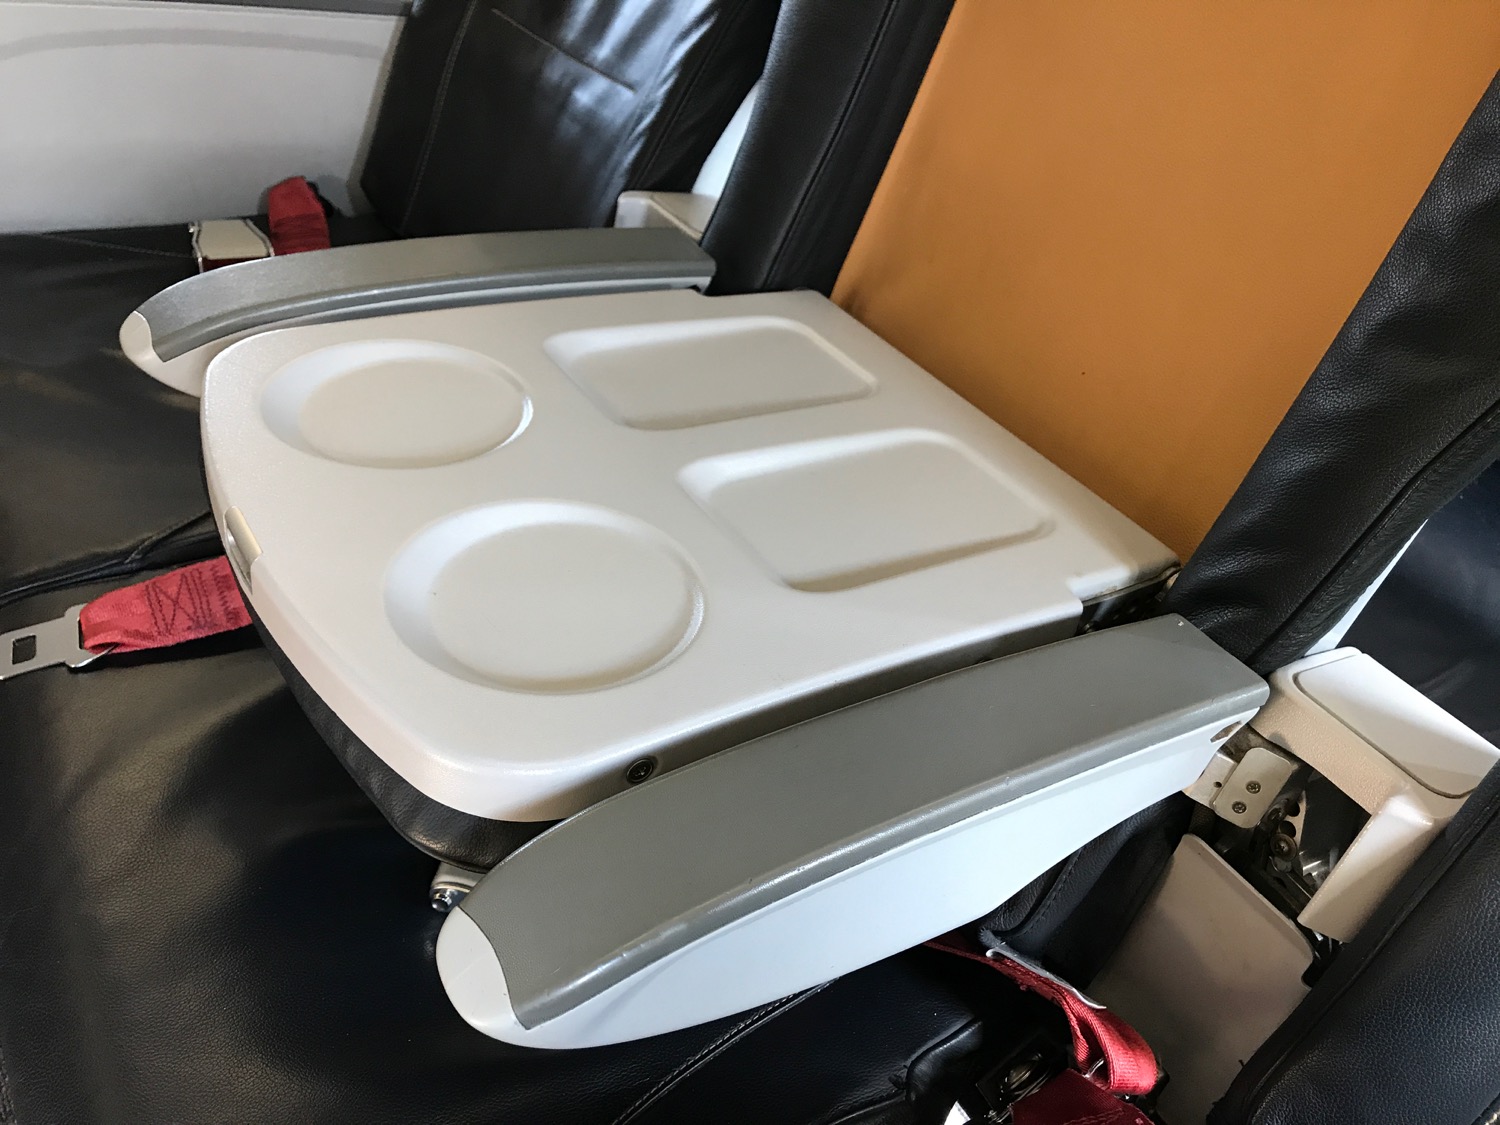 a seat in a plane